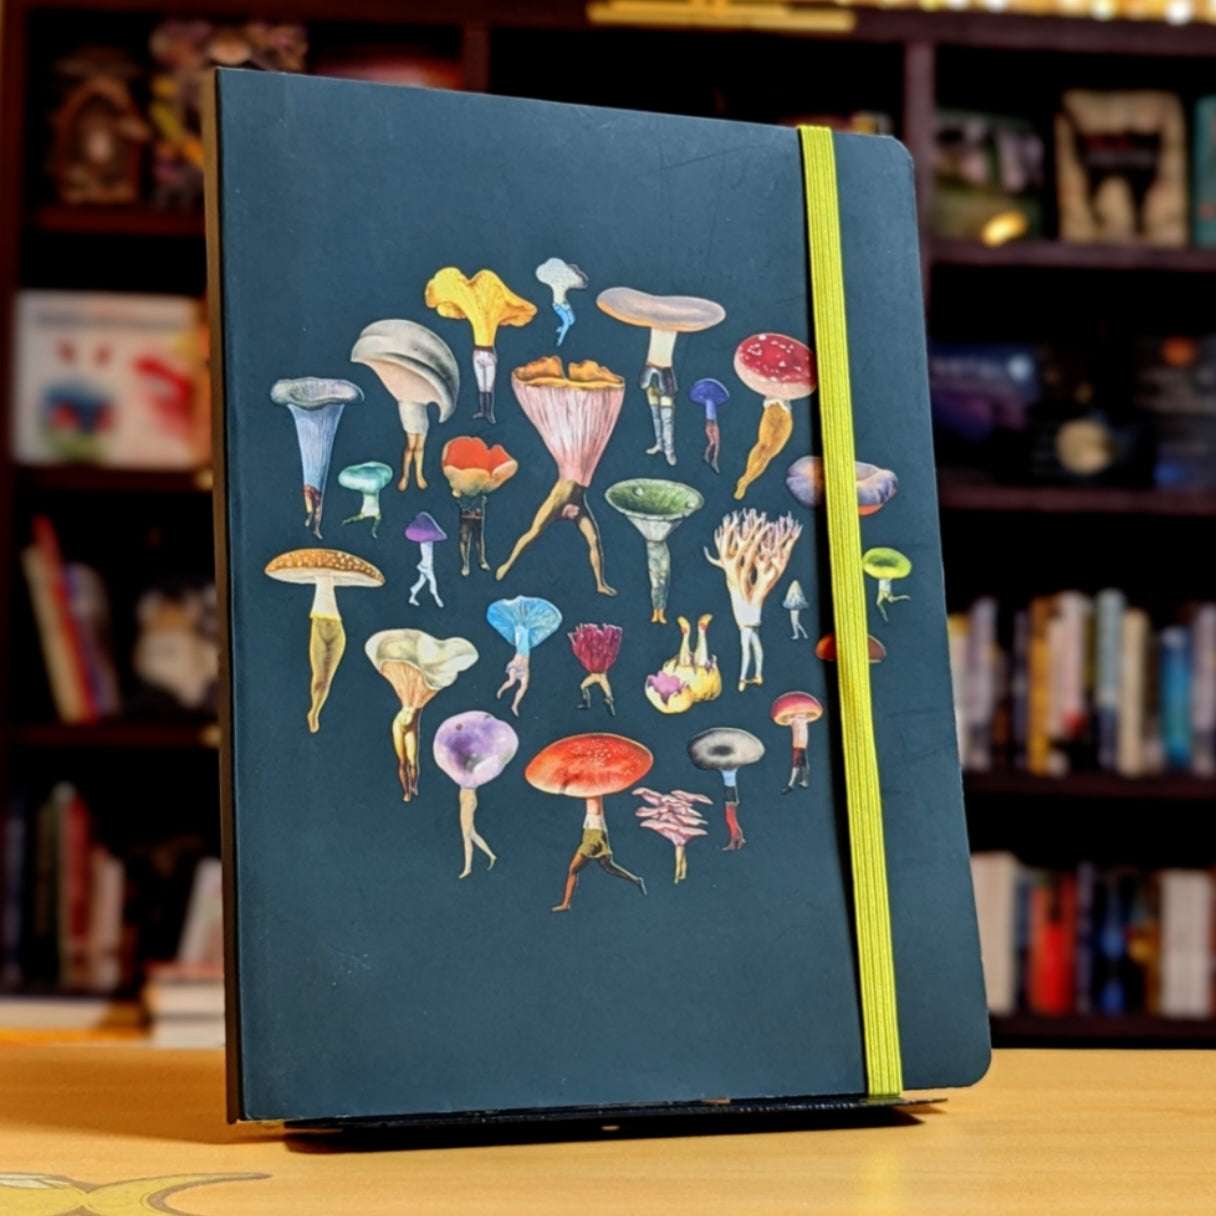 Art of Nature: Fungi Softcover Notebook: (Gifts for Mushroom Enthusiasts and Nature Lovers, Nature Journal, Nature Notebook, Journals for Hikers) (Fantastic Fungi)